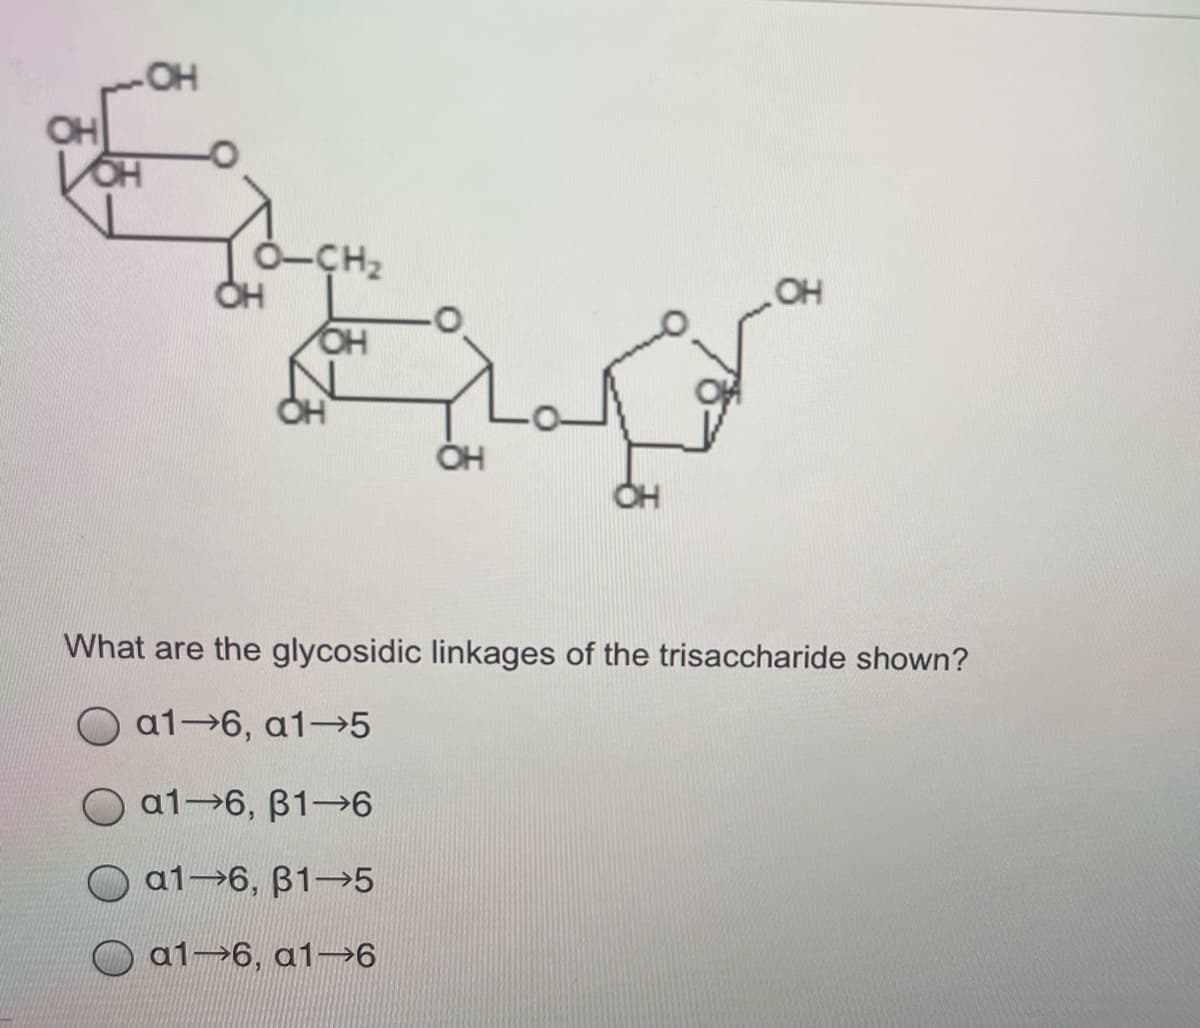 OH
CH2
OH
What are the glycosidic linkages of the trisaccharide shown?
a1 6, a1 5
O a1 6, B1-→6
O a1 6, B1-→5
a1→6, a1→6
